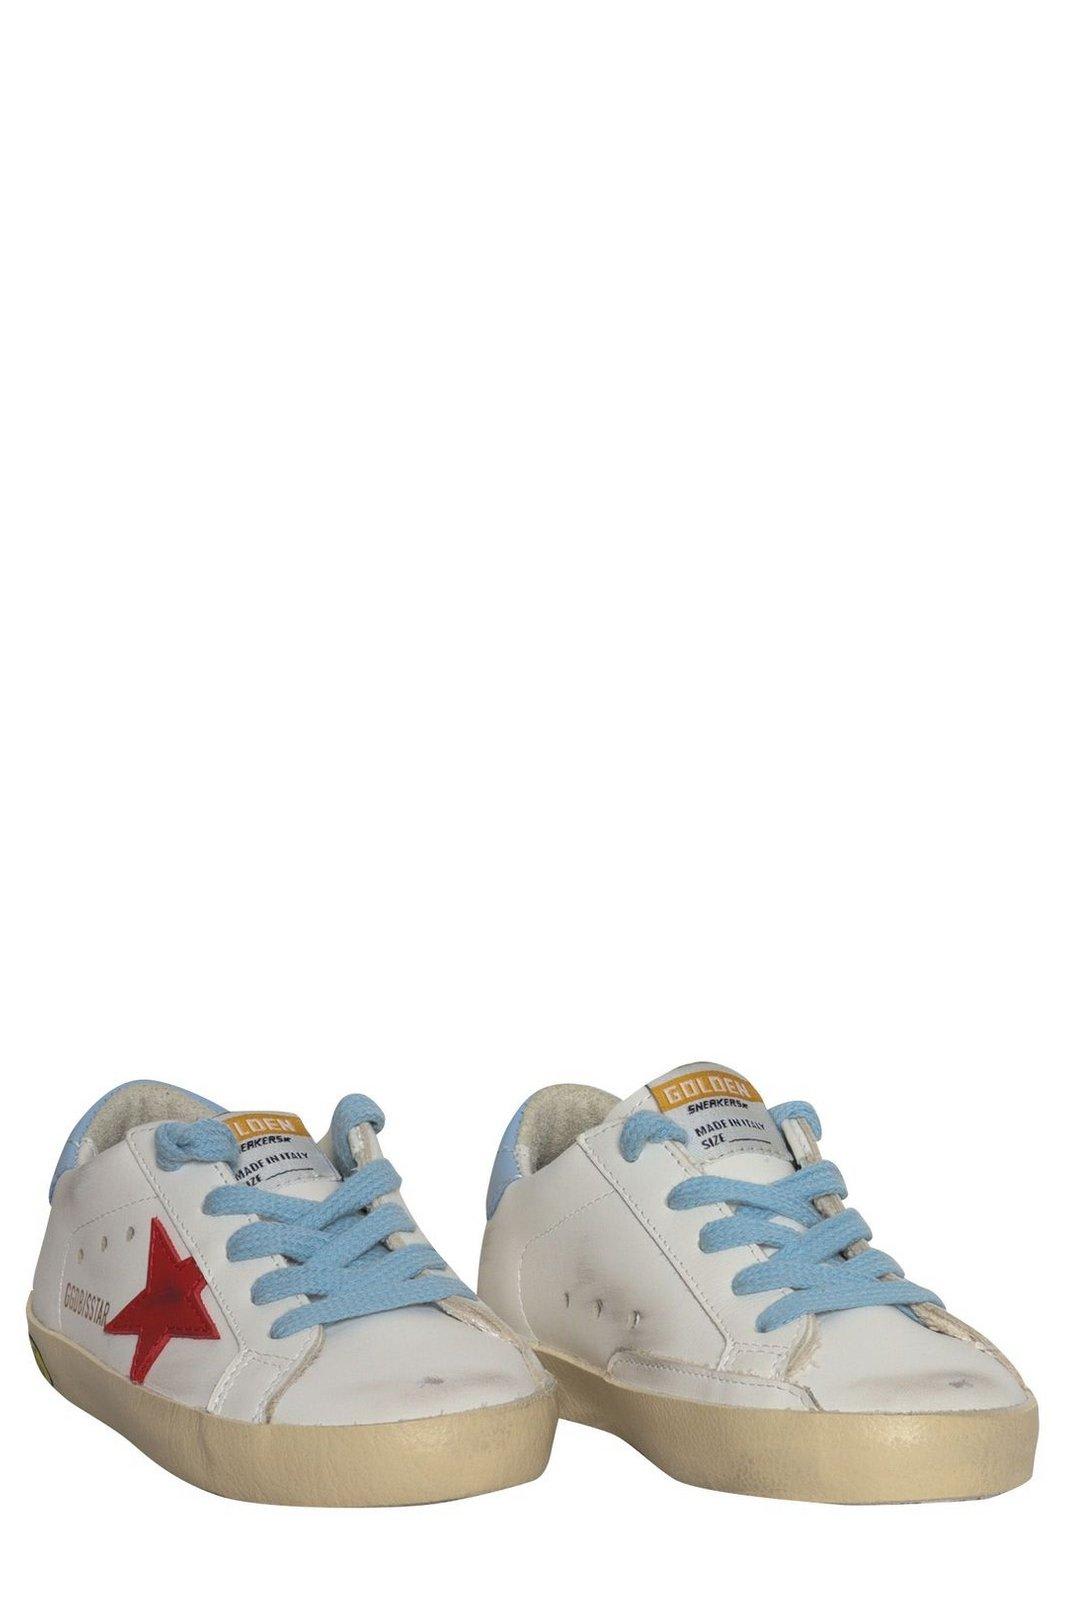 Shop Golden Goose Kids Super Star Classic Lace-up Sneakers In White/red